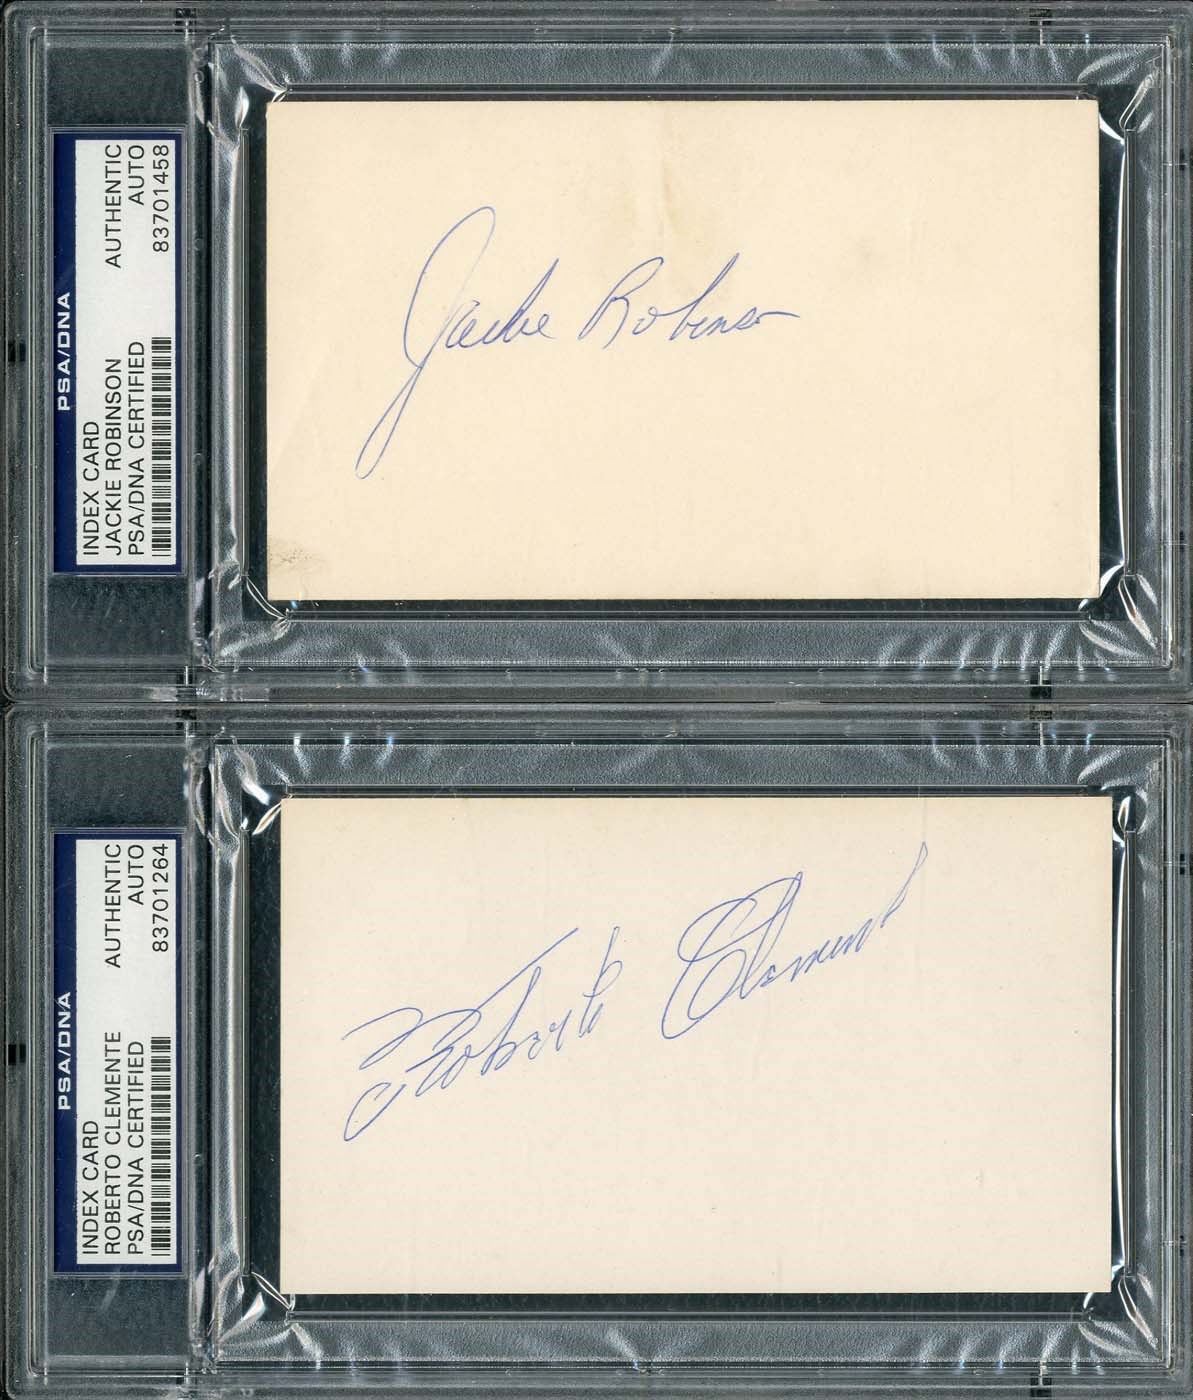 Baseball Autographs - Jackie Robinson & Roberto Clemente Signed Index Cards (PSA/DNA)